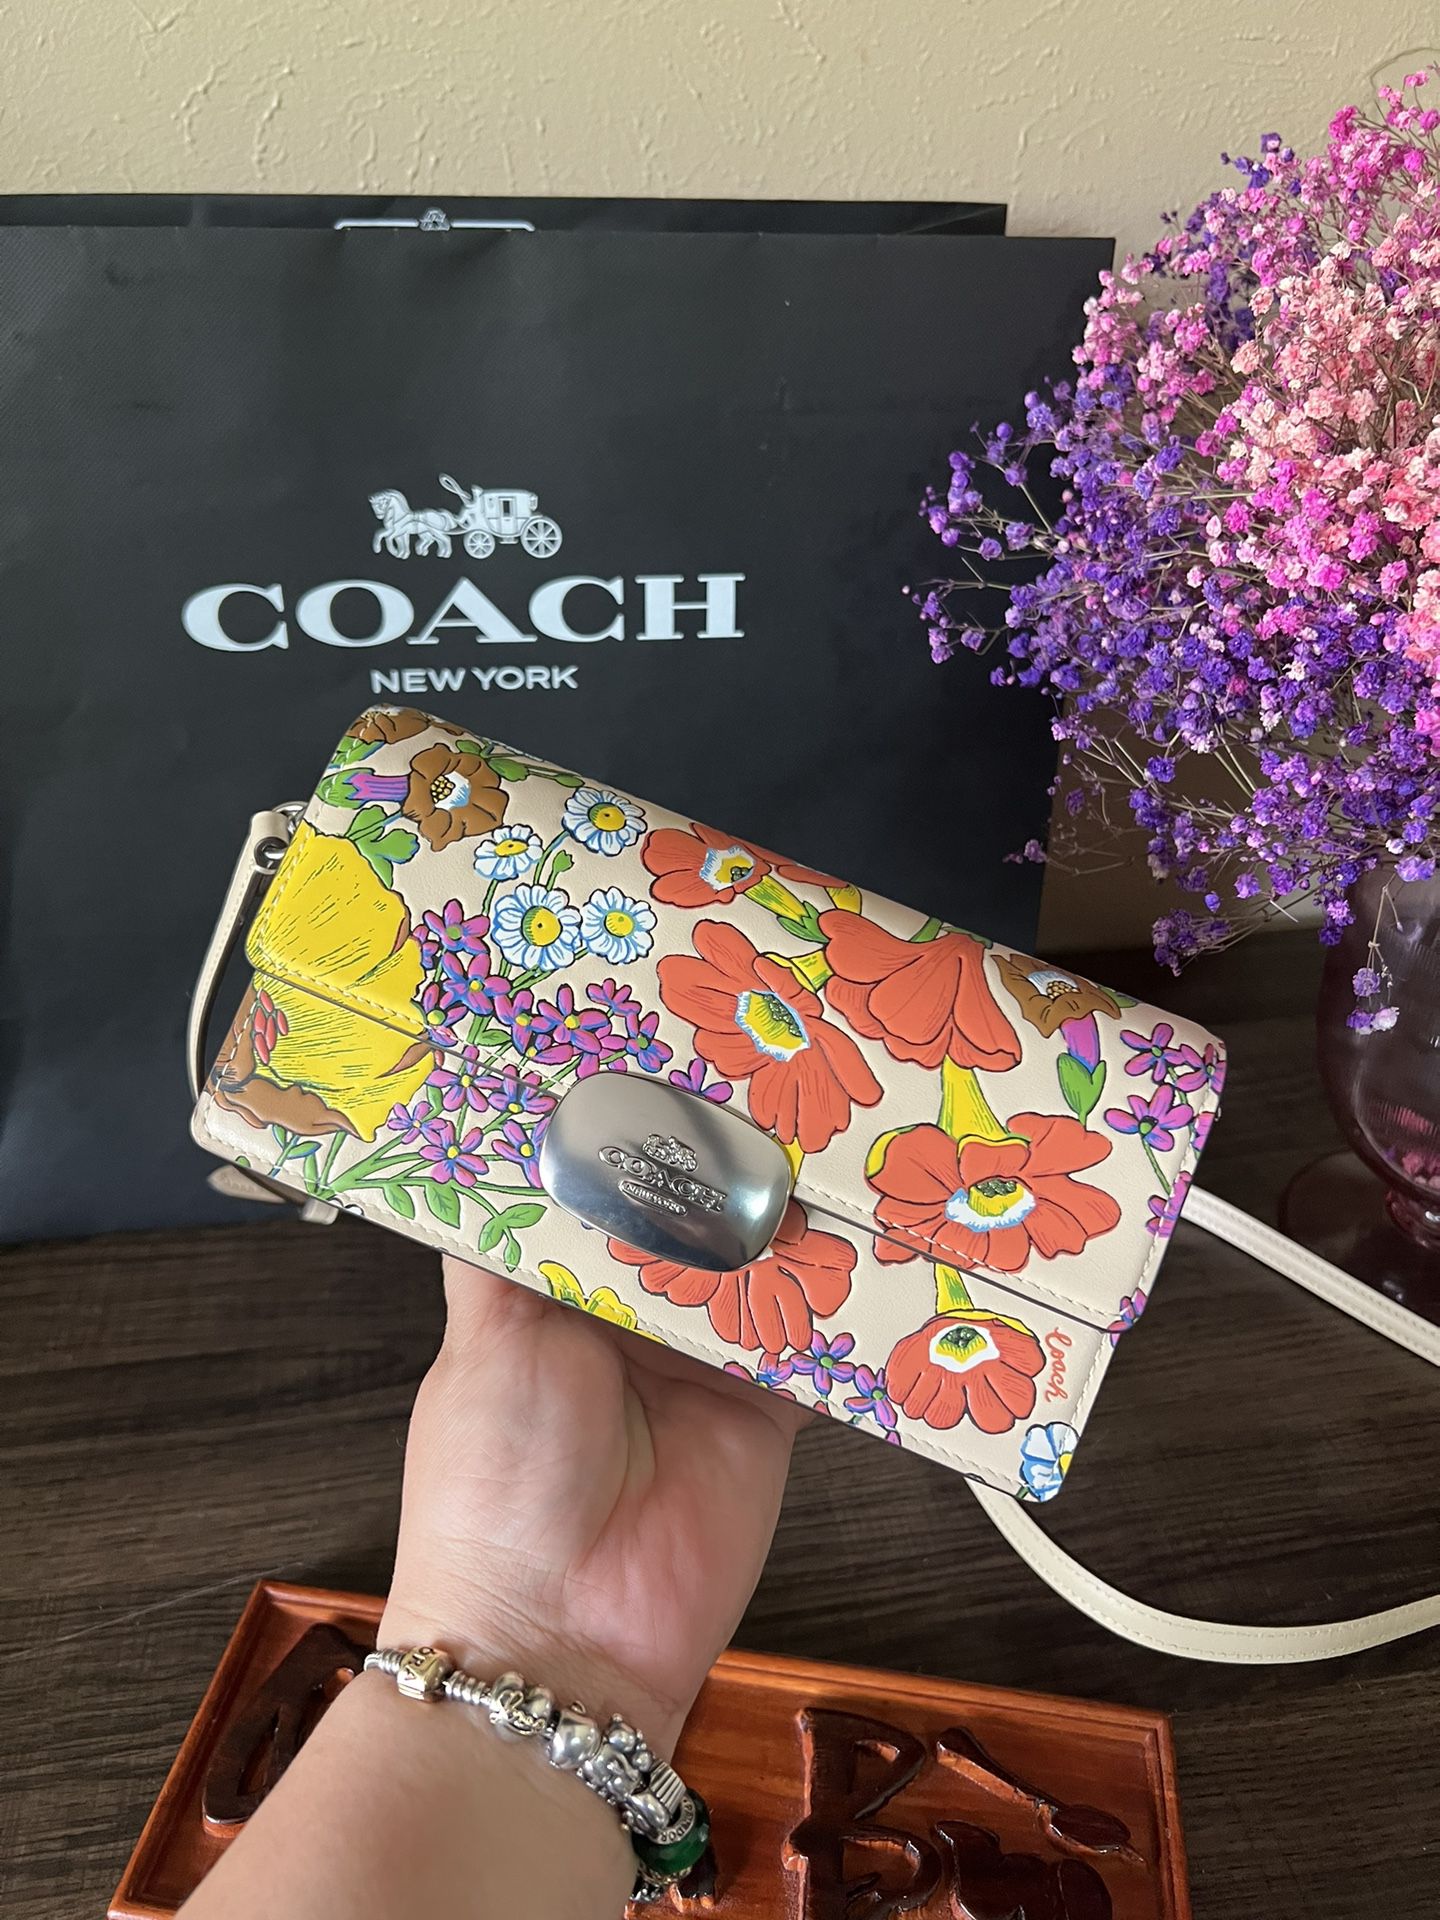 Coach Eliza Small Flap Crossbody With Floral Print